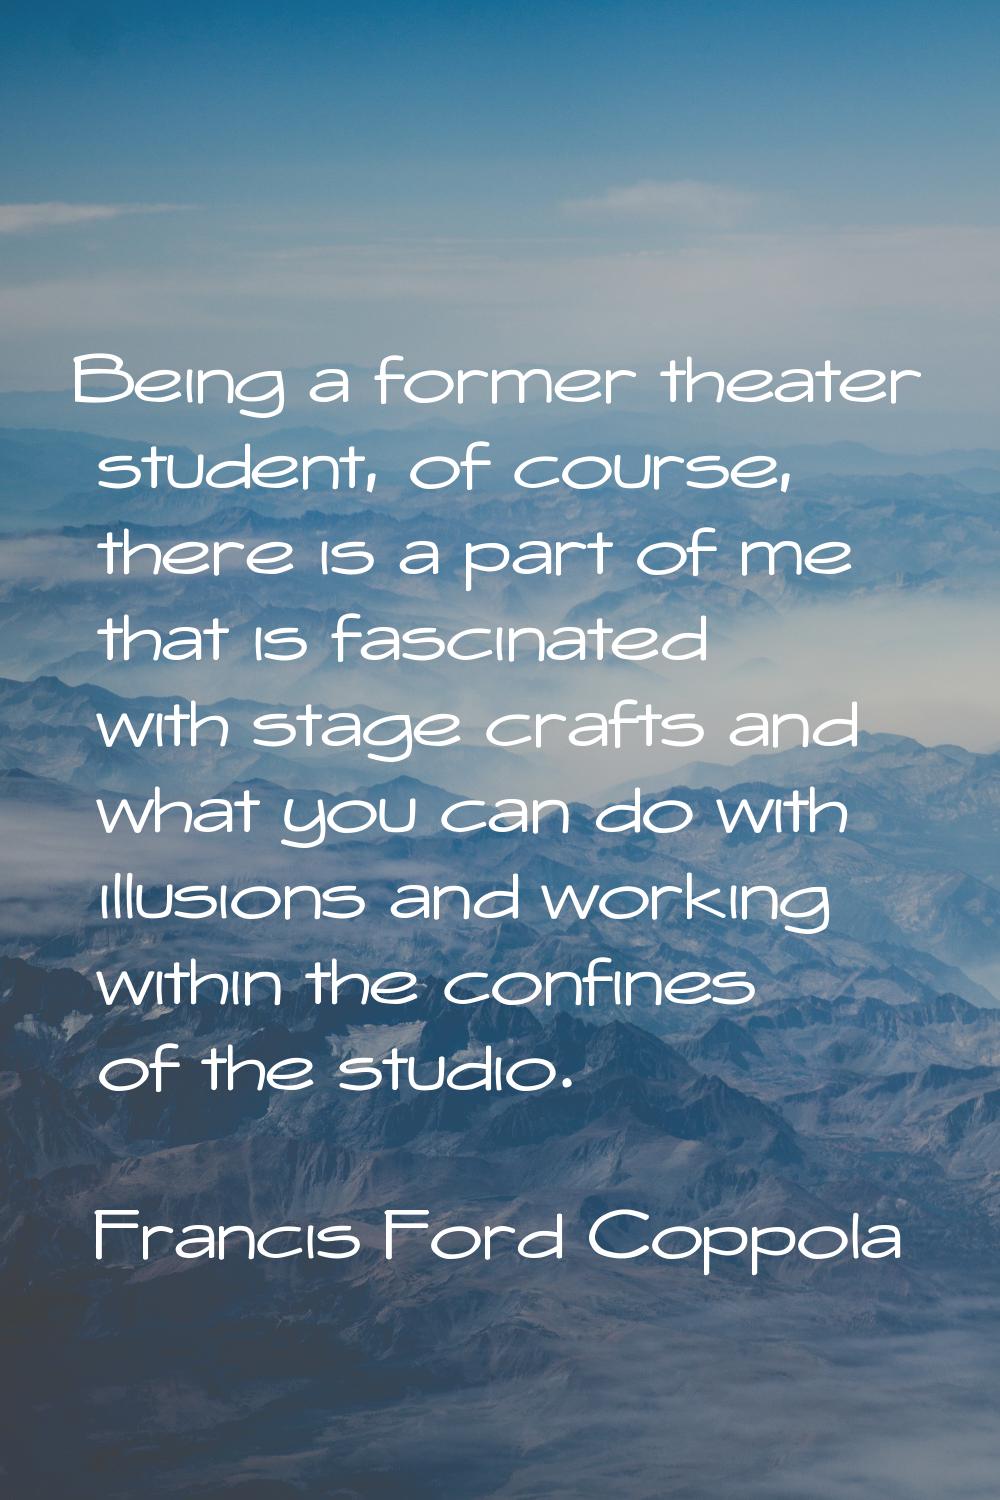 Being a former theater student, of course, there is a part of me that is fascinated with stage craf